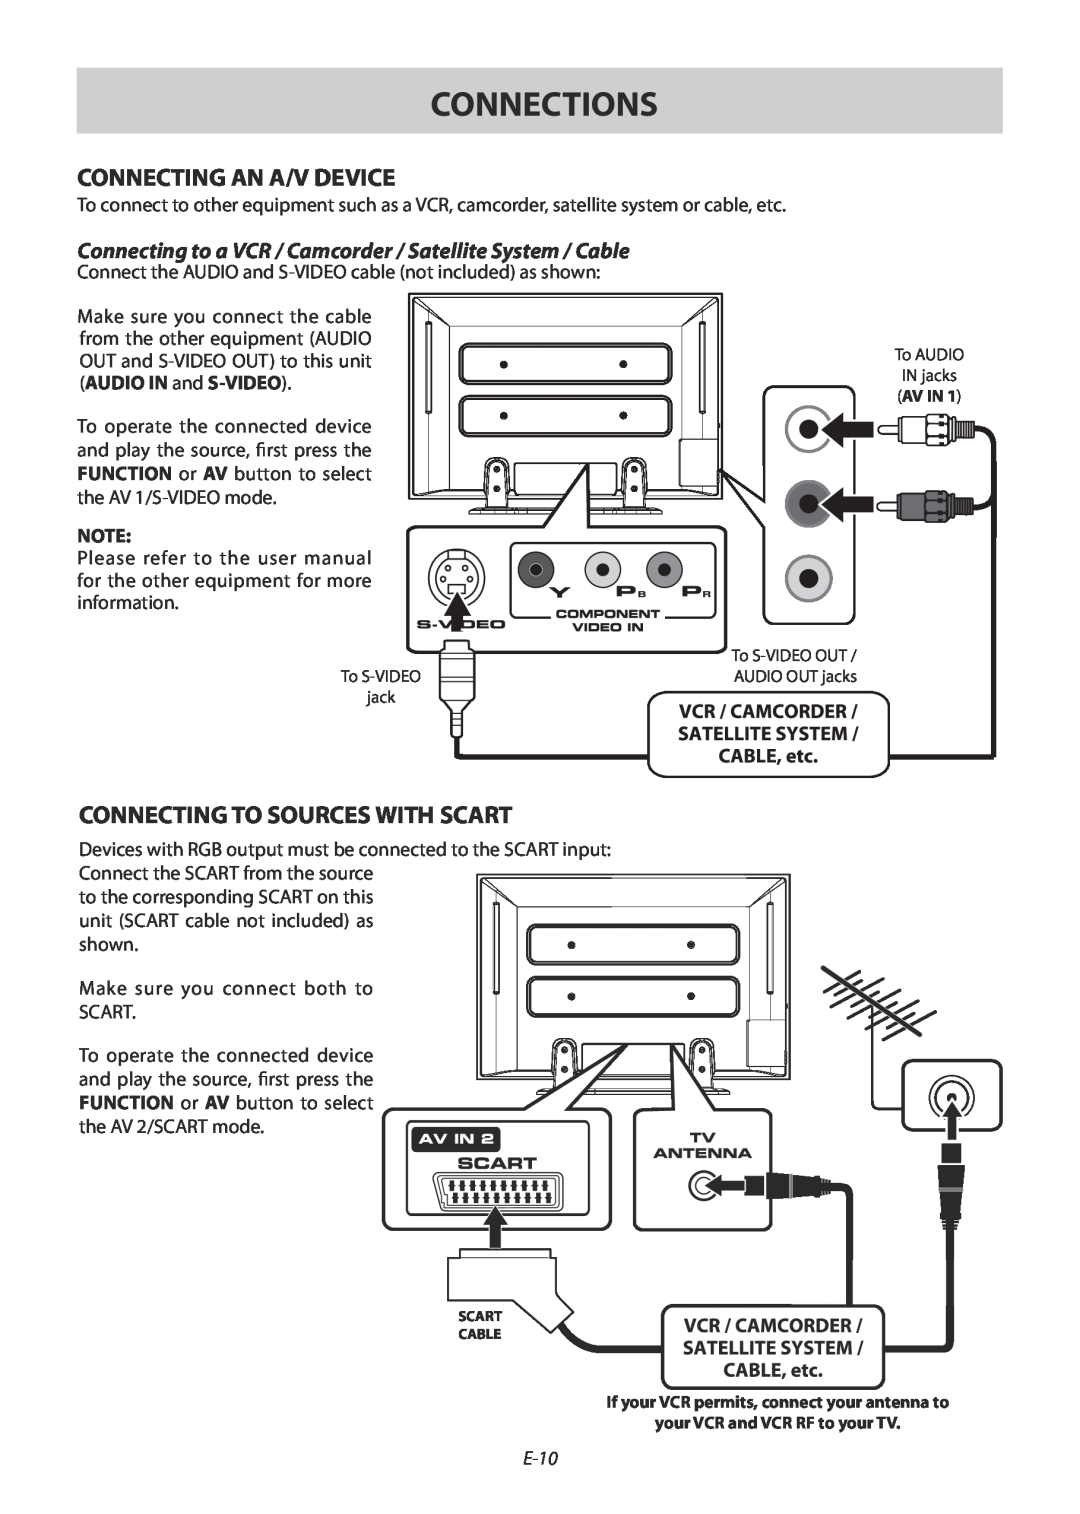 Technika 42-502 manual Connecting An A/V Device, Connecting To Sources With Scart, E-10, Connections 